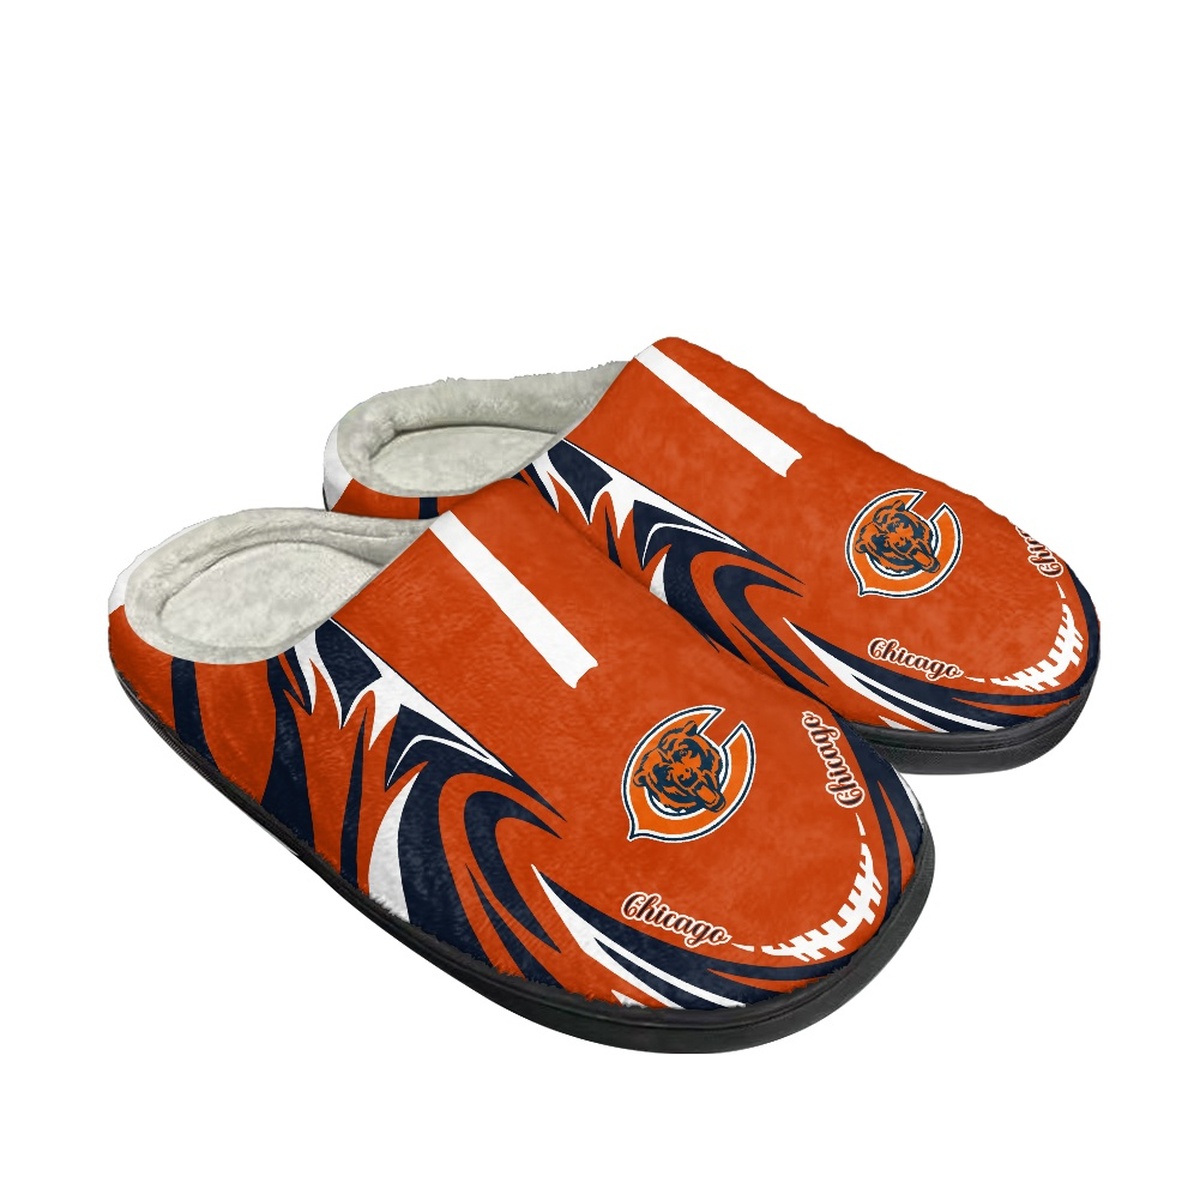 Women's Chicago Bears Slippers/Shoes 004